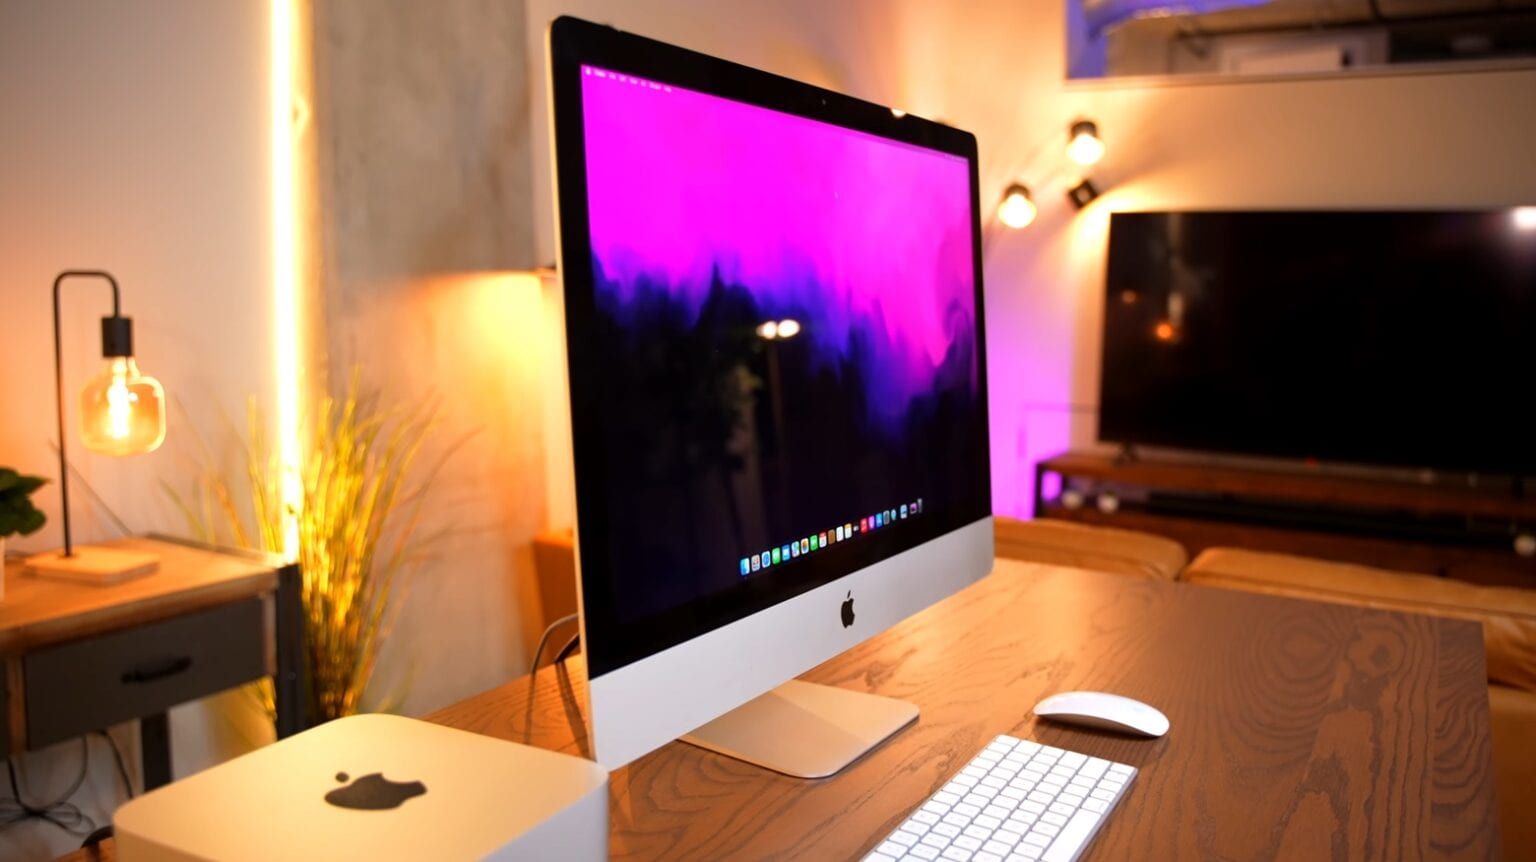 Clever DIY projects hacks old iMac into a Studio Display